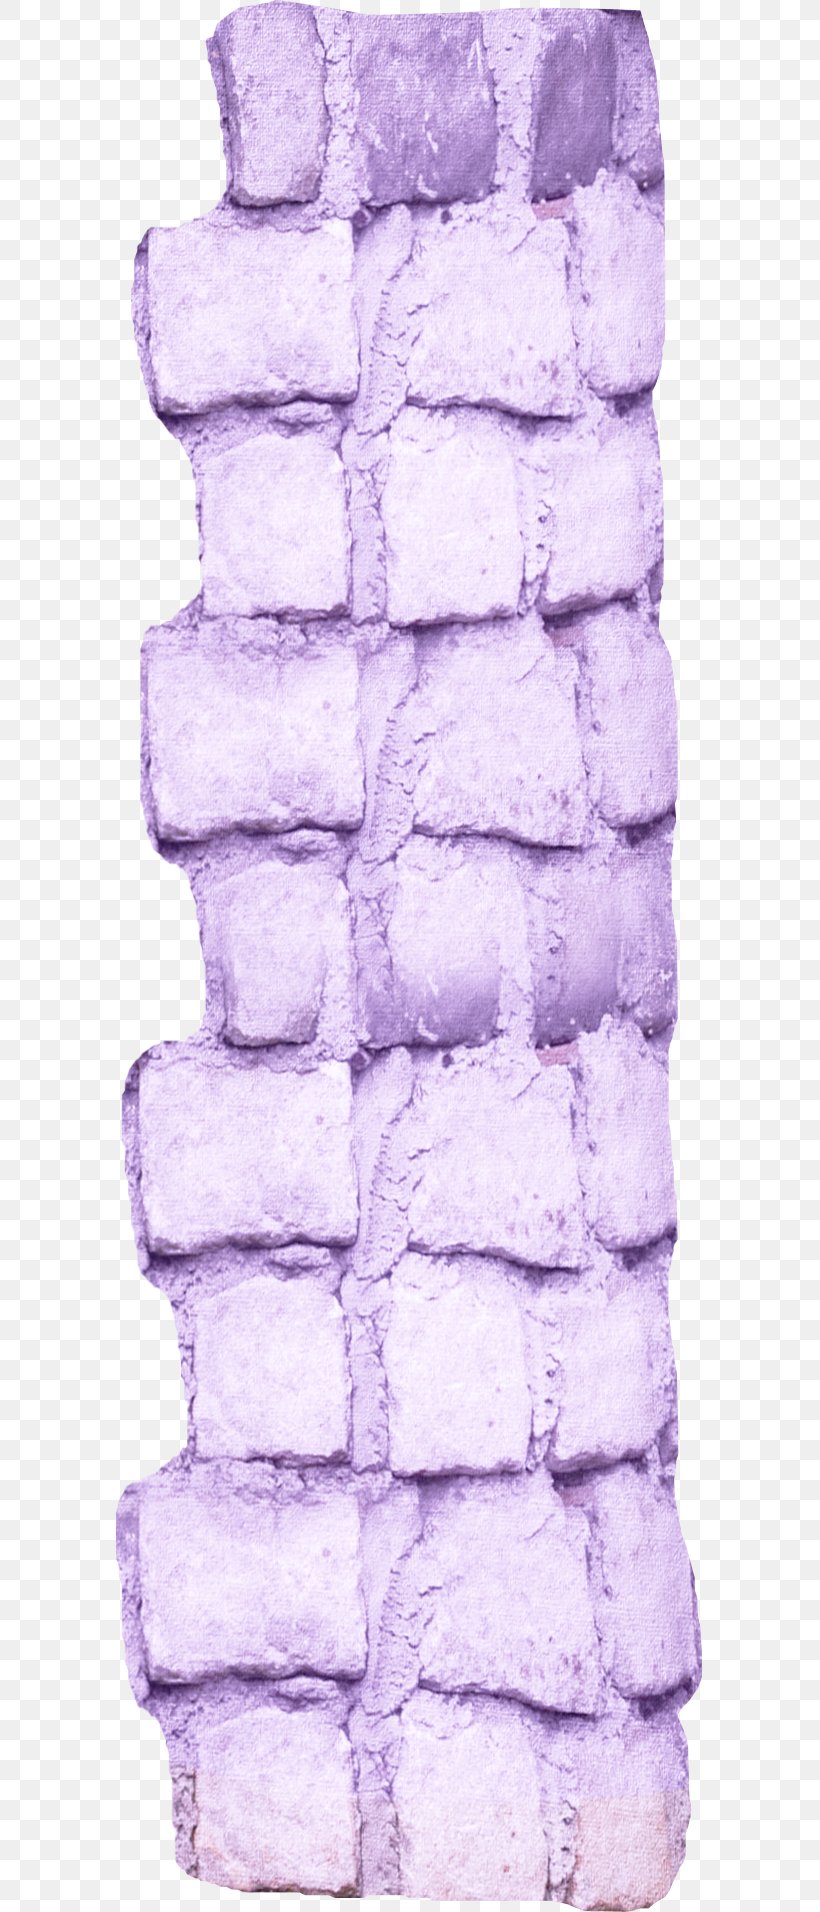 Brick Partition Wall, PNG, 587x1912px, Brick, Lavender, Lilac, Material, Purple Download Free